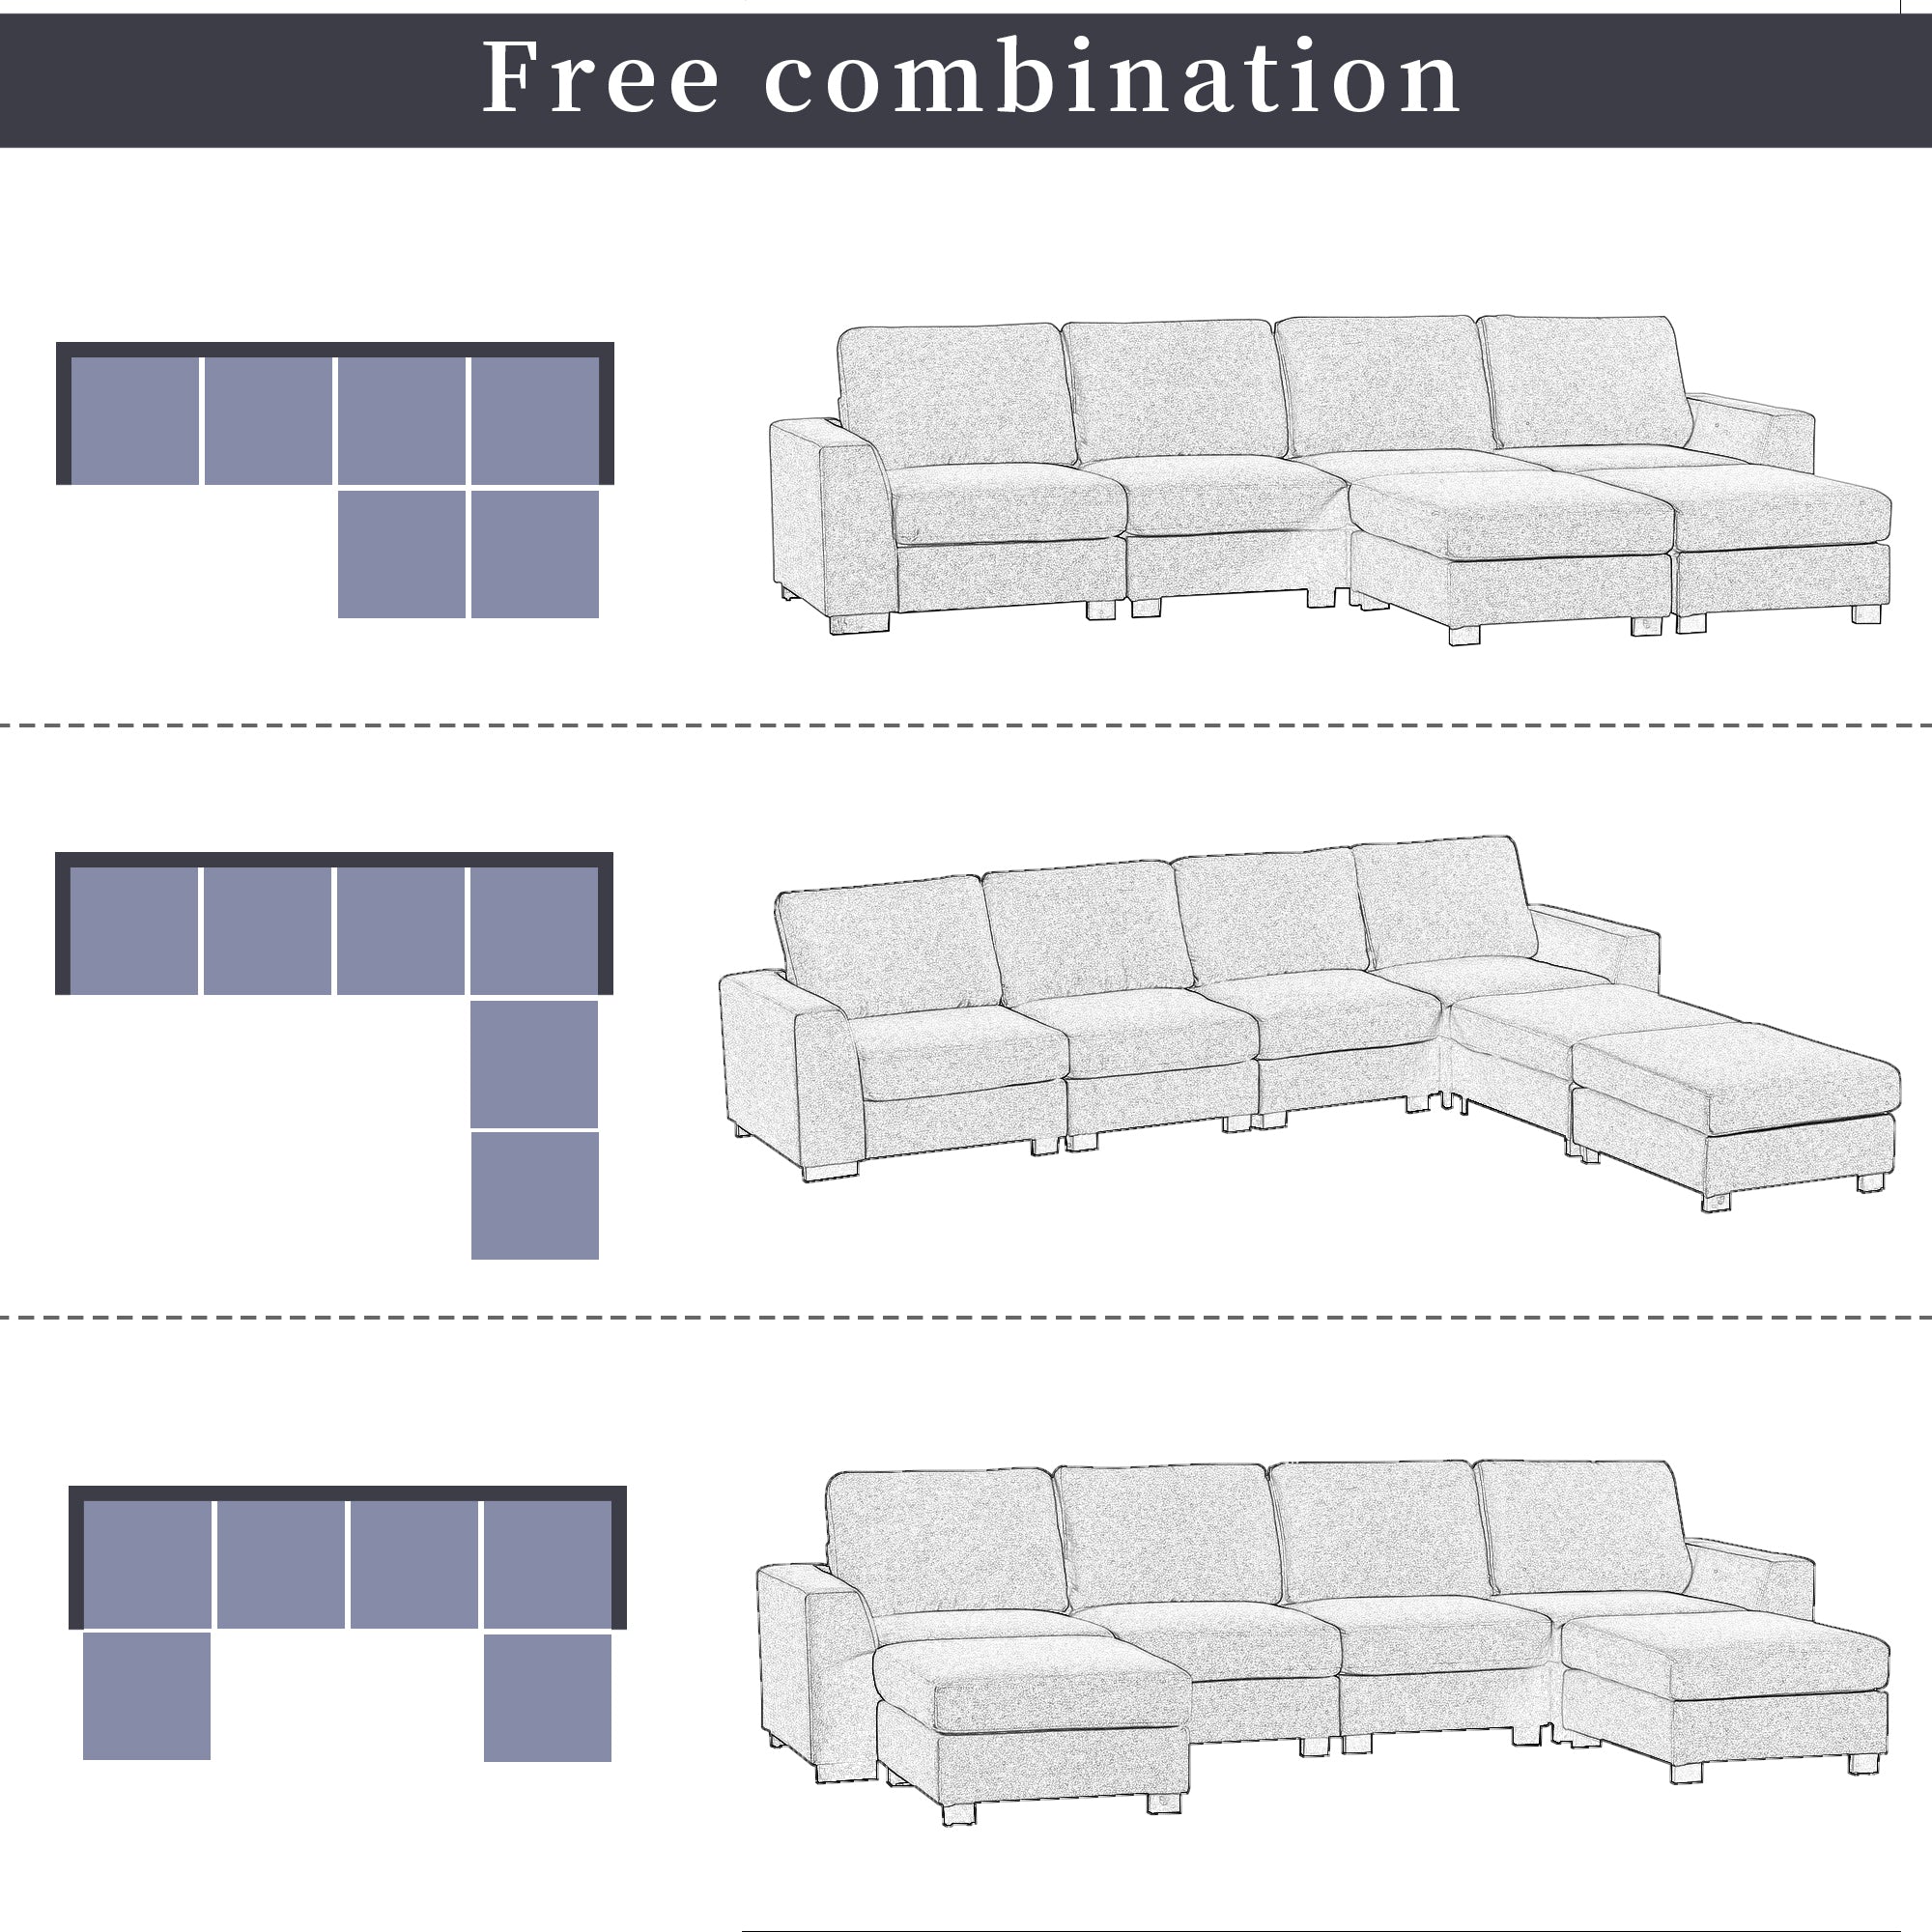 Cozy & Stylish Beige Modular Sectional-Stationary Sectionals-American Furniture Outlet